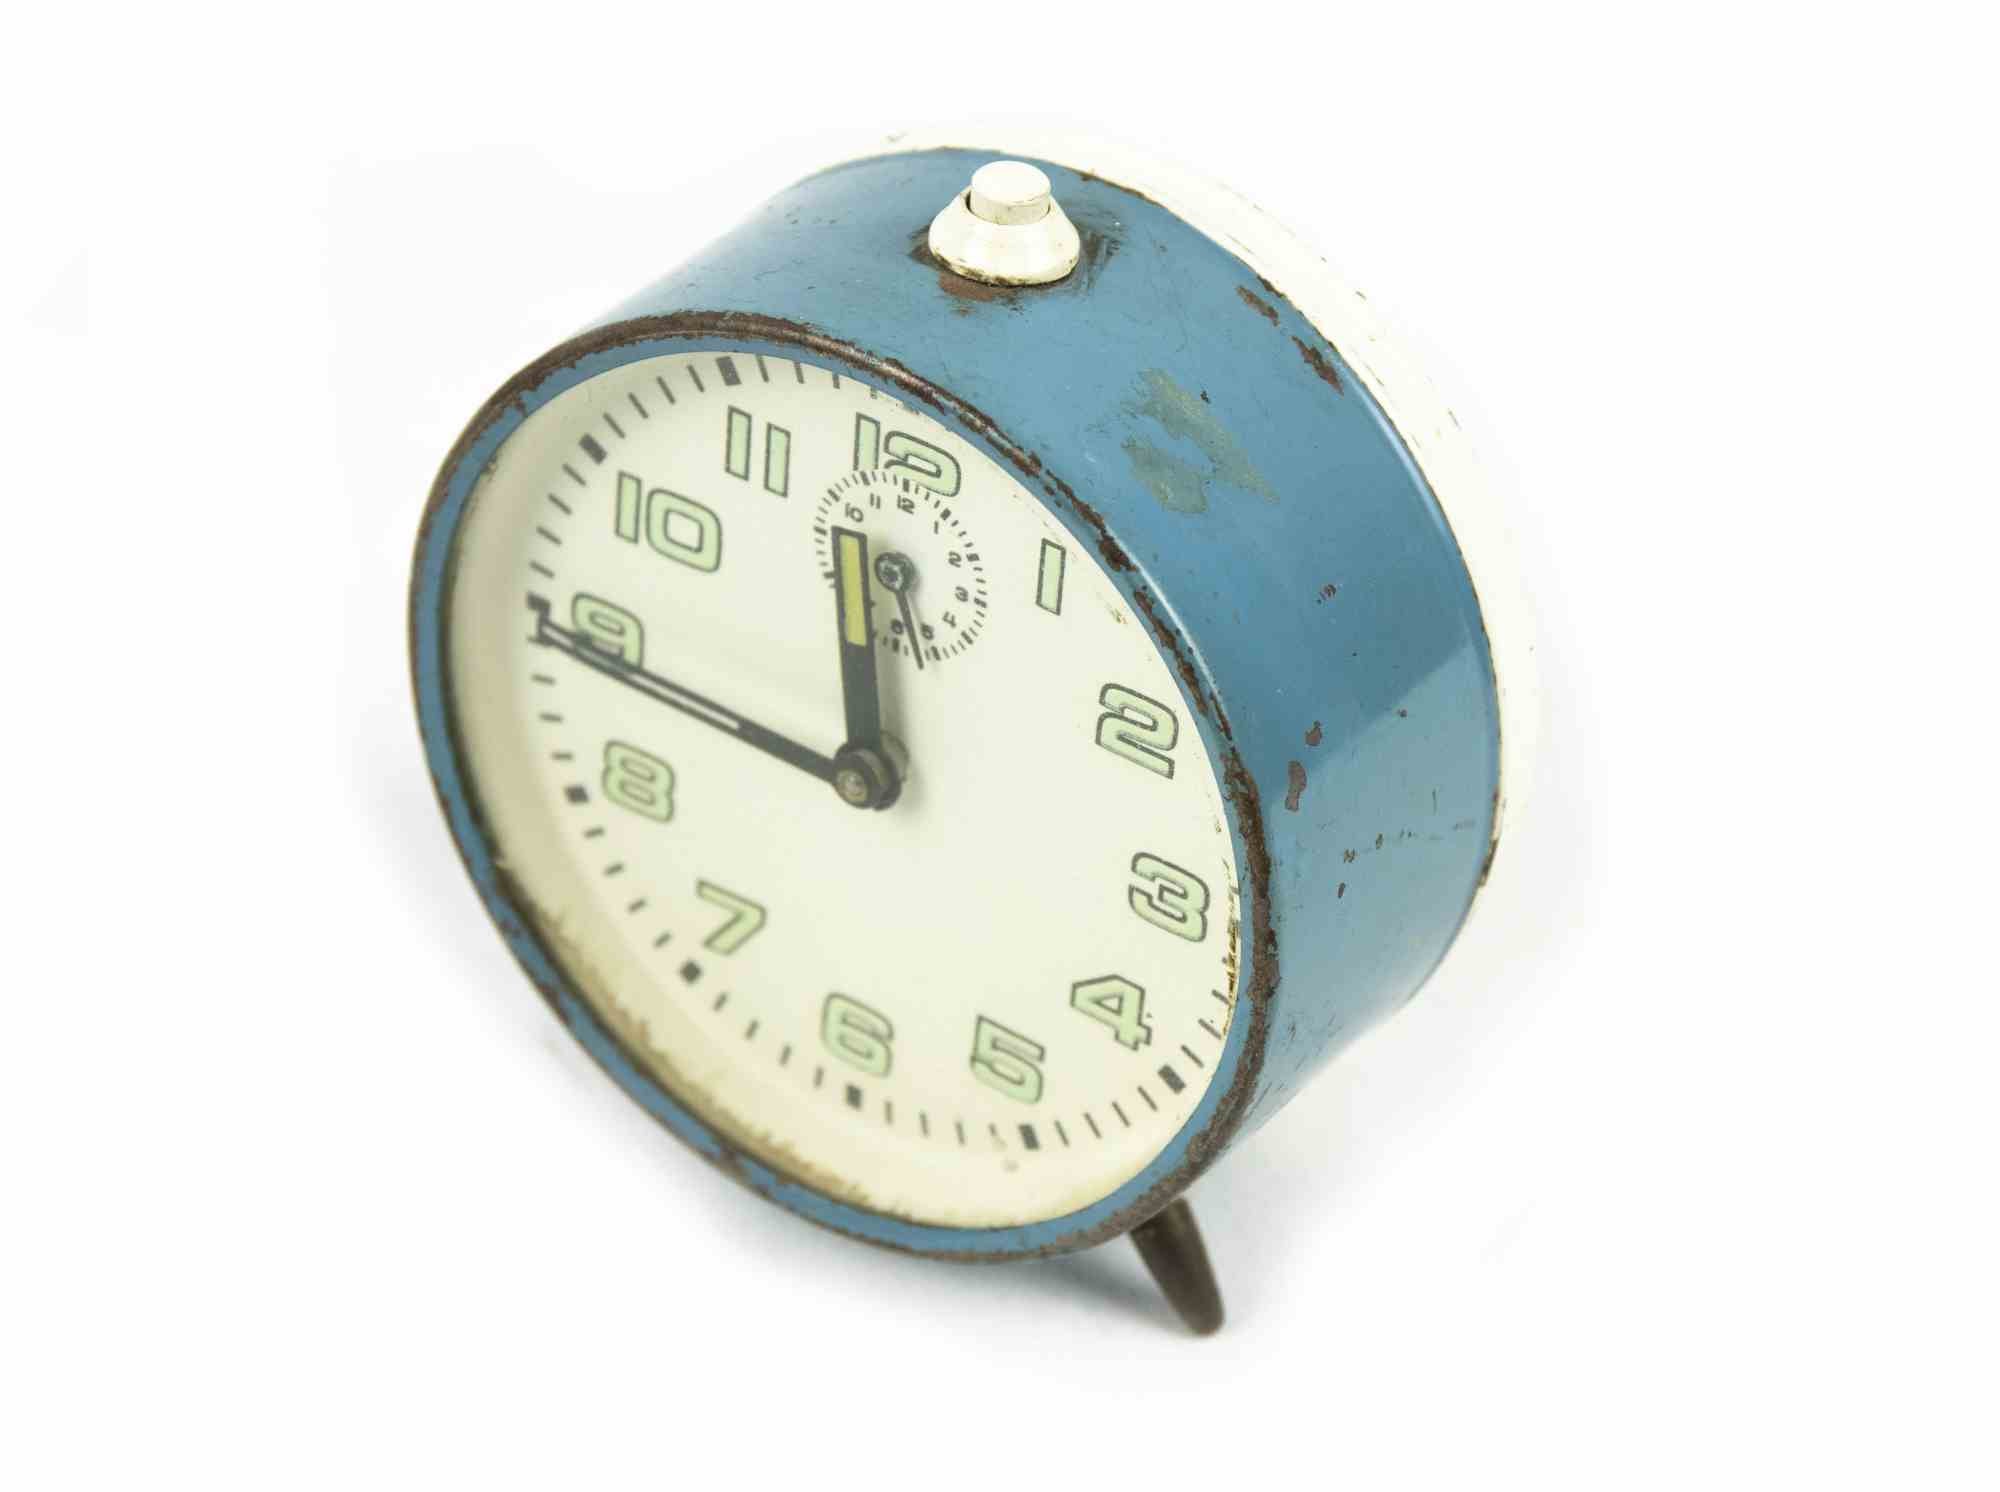 Vintage Alarm Clock is a decorative object realized in the 1970s.

A vintage clock light blue colored.

The perfect gift for a jump to the past.

Not in a perfect condition due to the time.